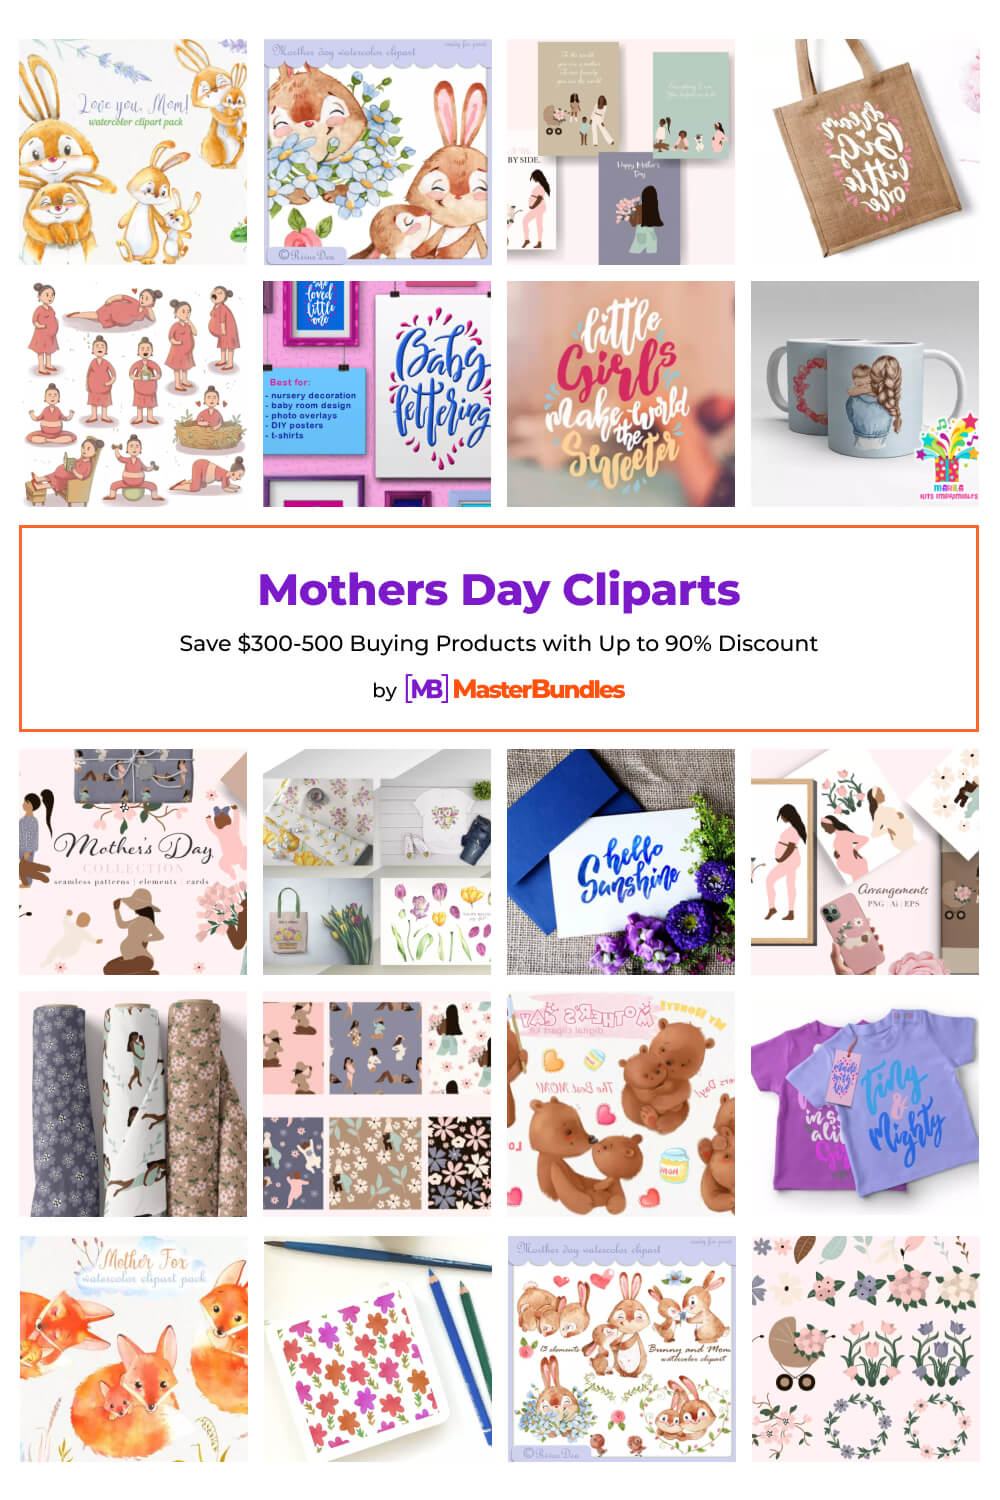 mothers day cliparts pinterest image.